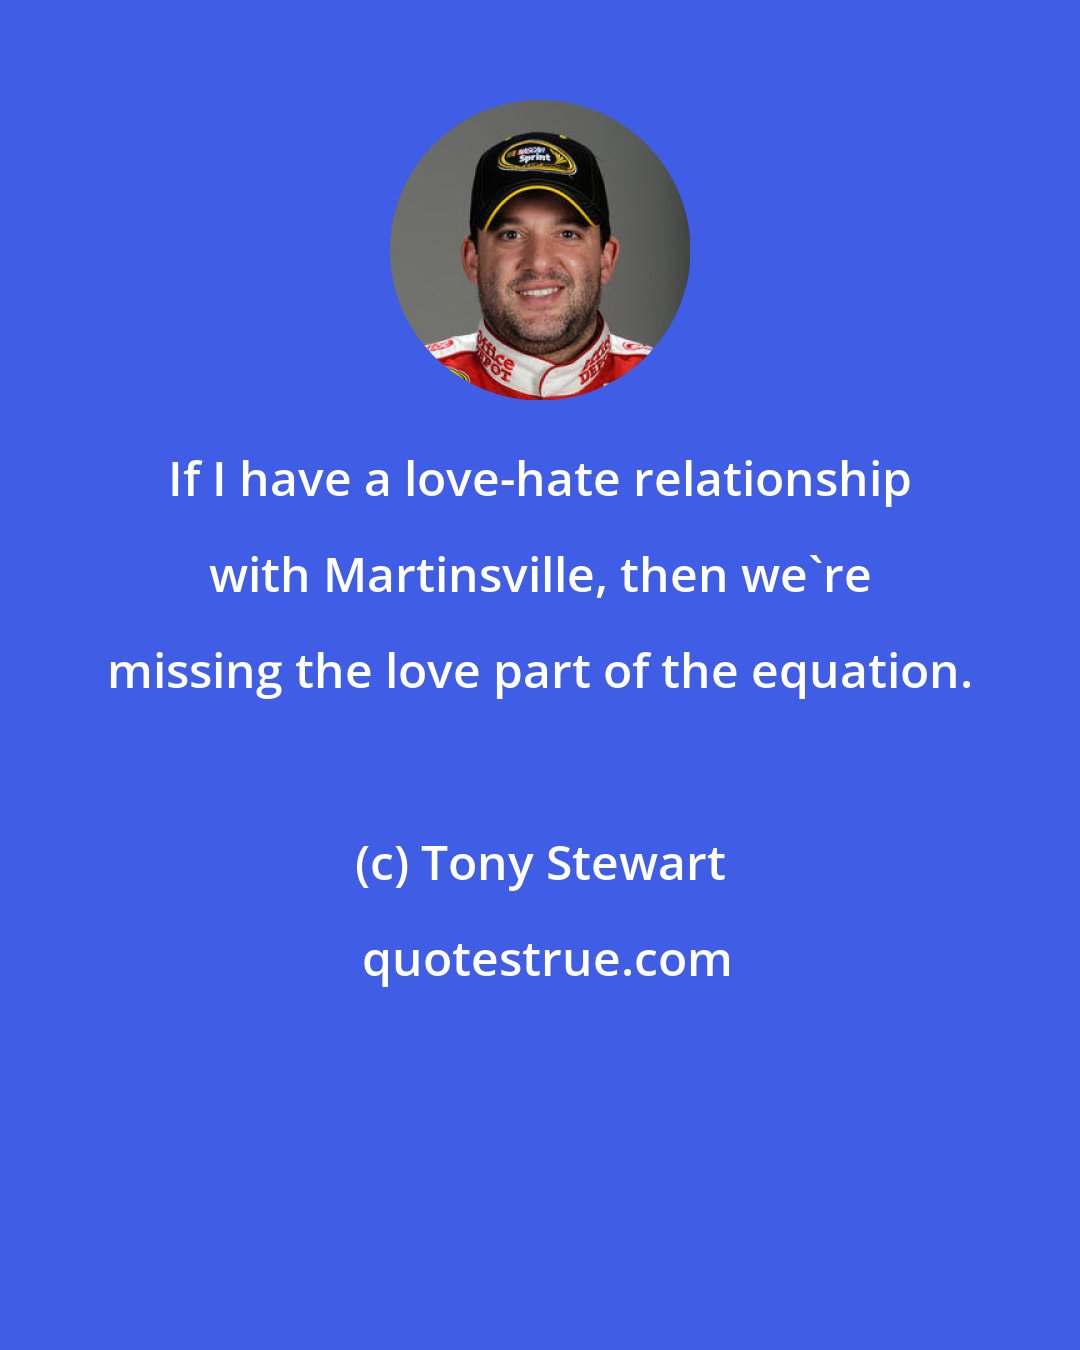 Tony Stewart: If I have a love-hate relationship with Martinsville, then we're missing the love part of the equation.